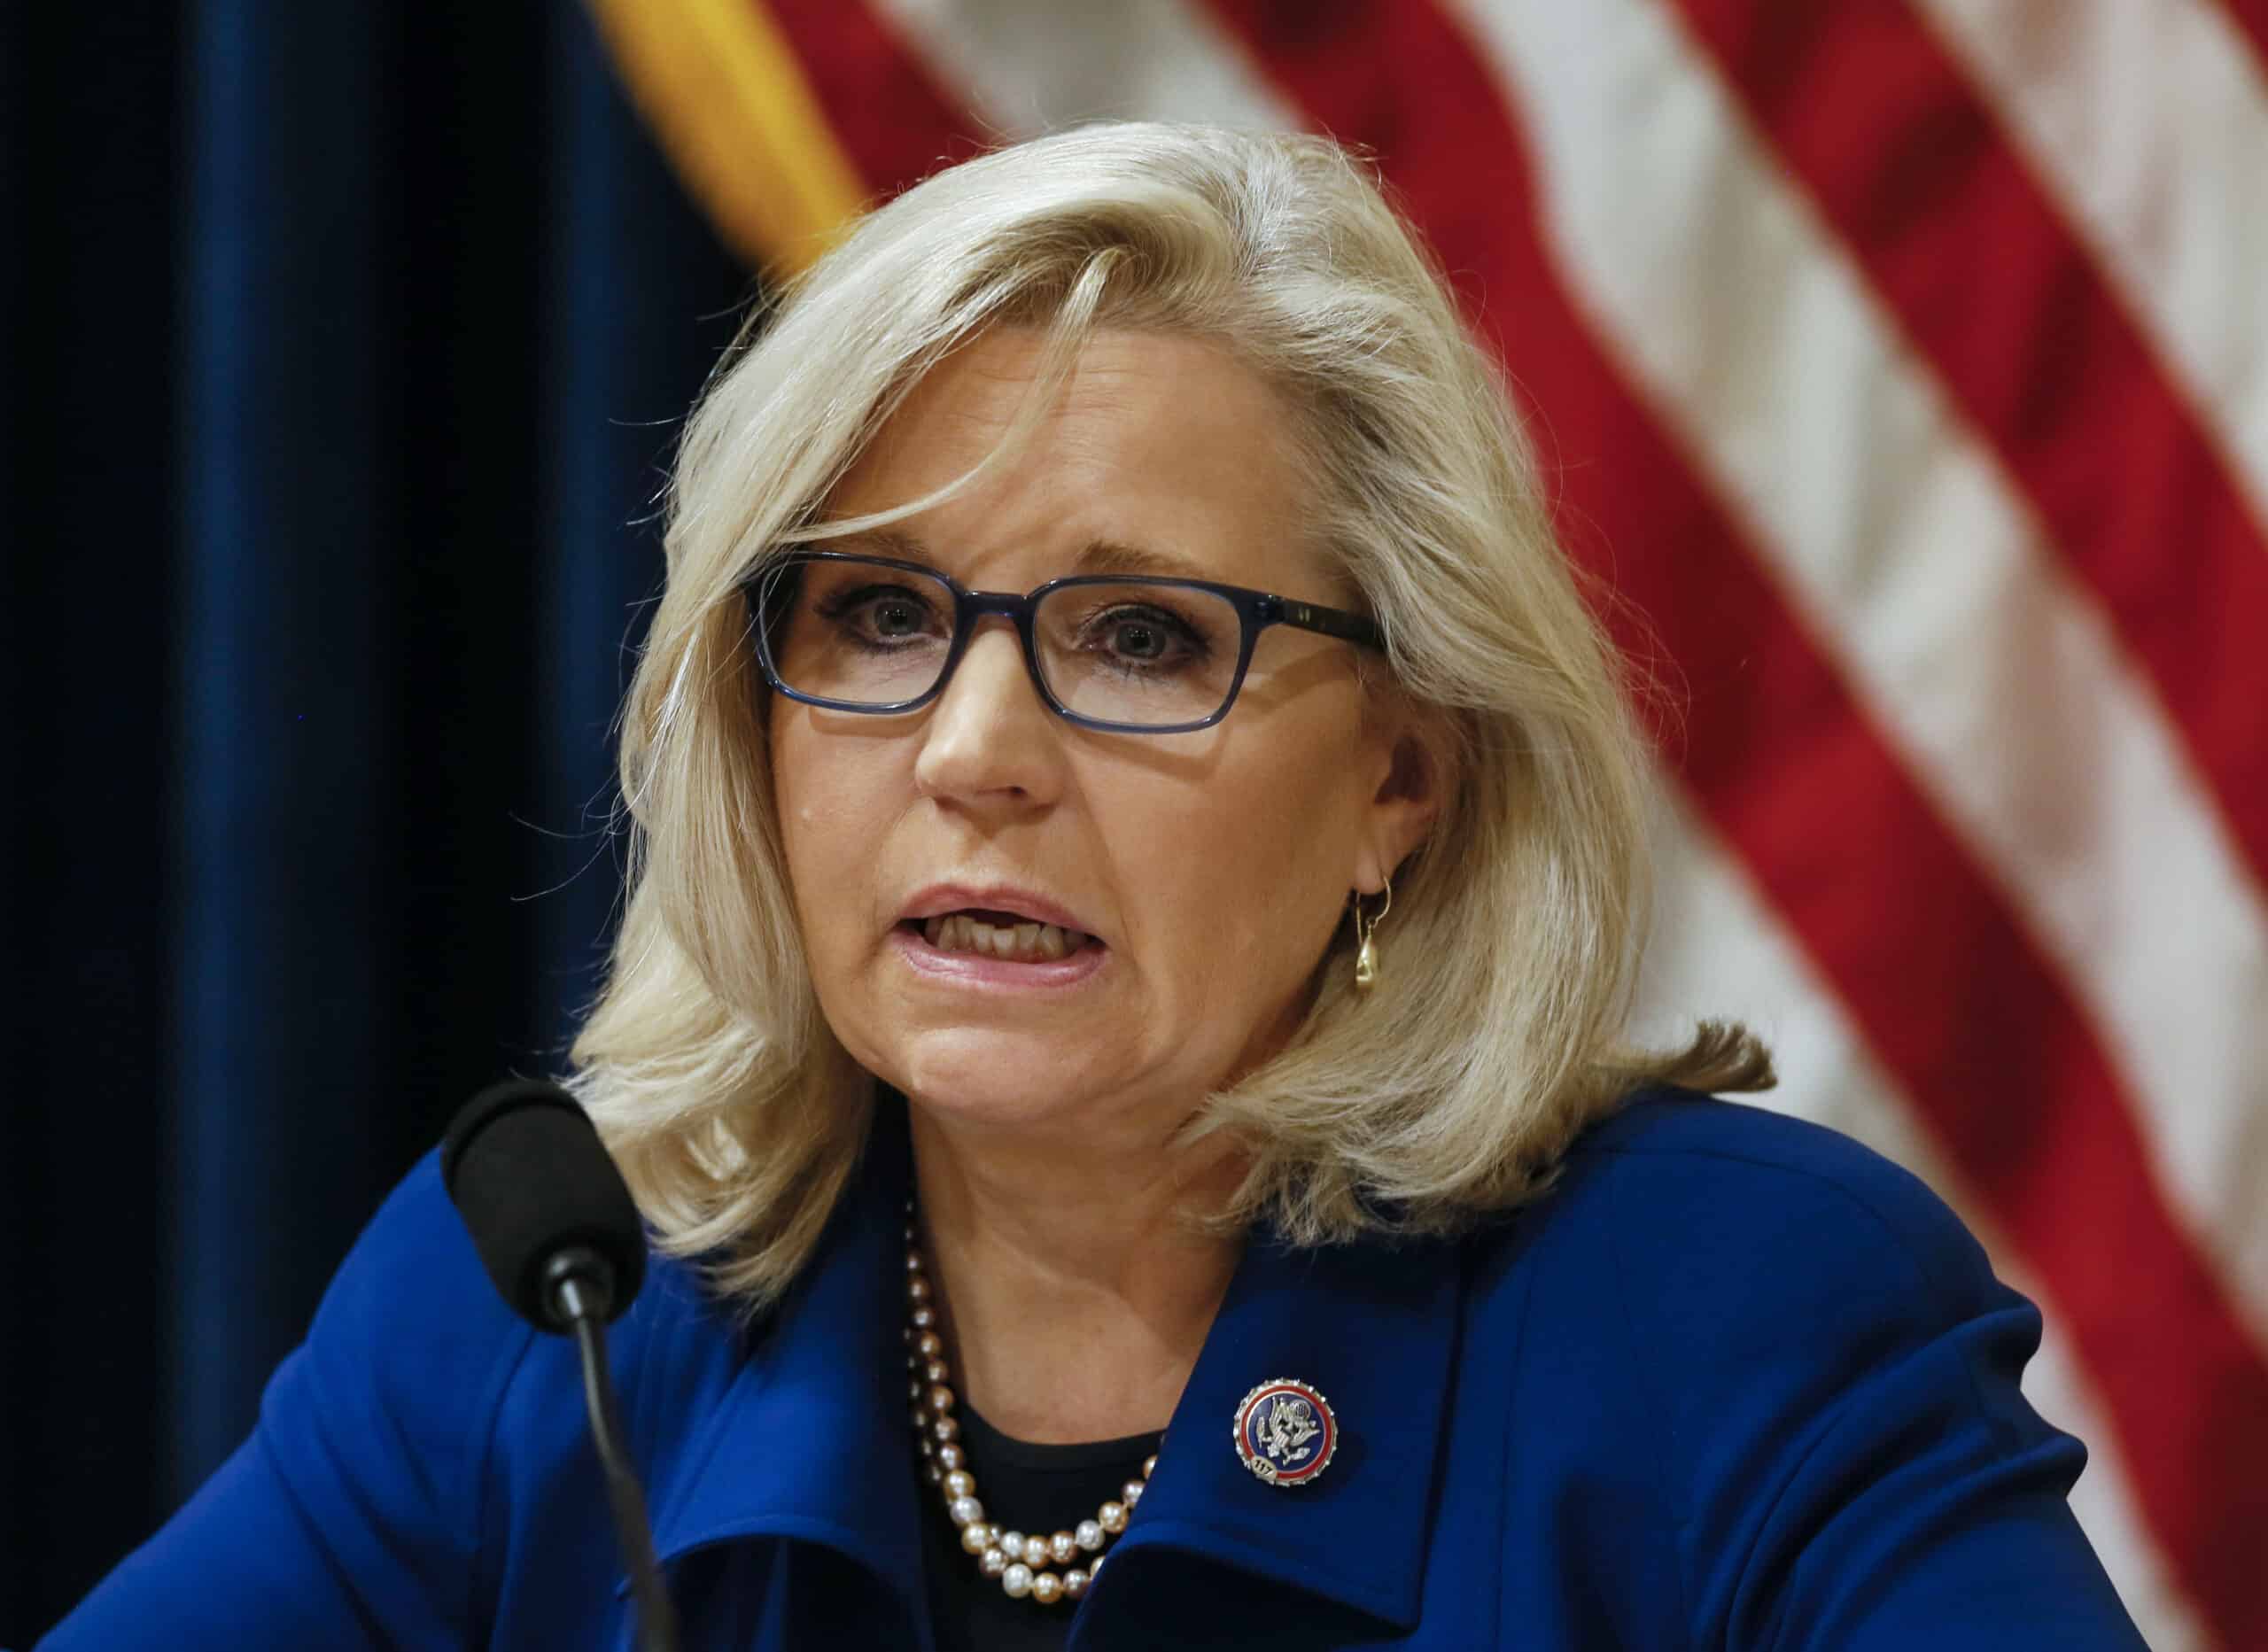 Rep. Cheney claims vote against her is vote against
Constitution 1